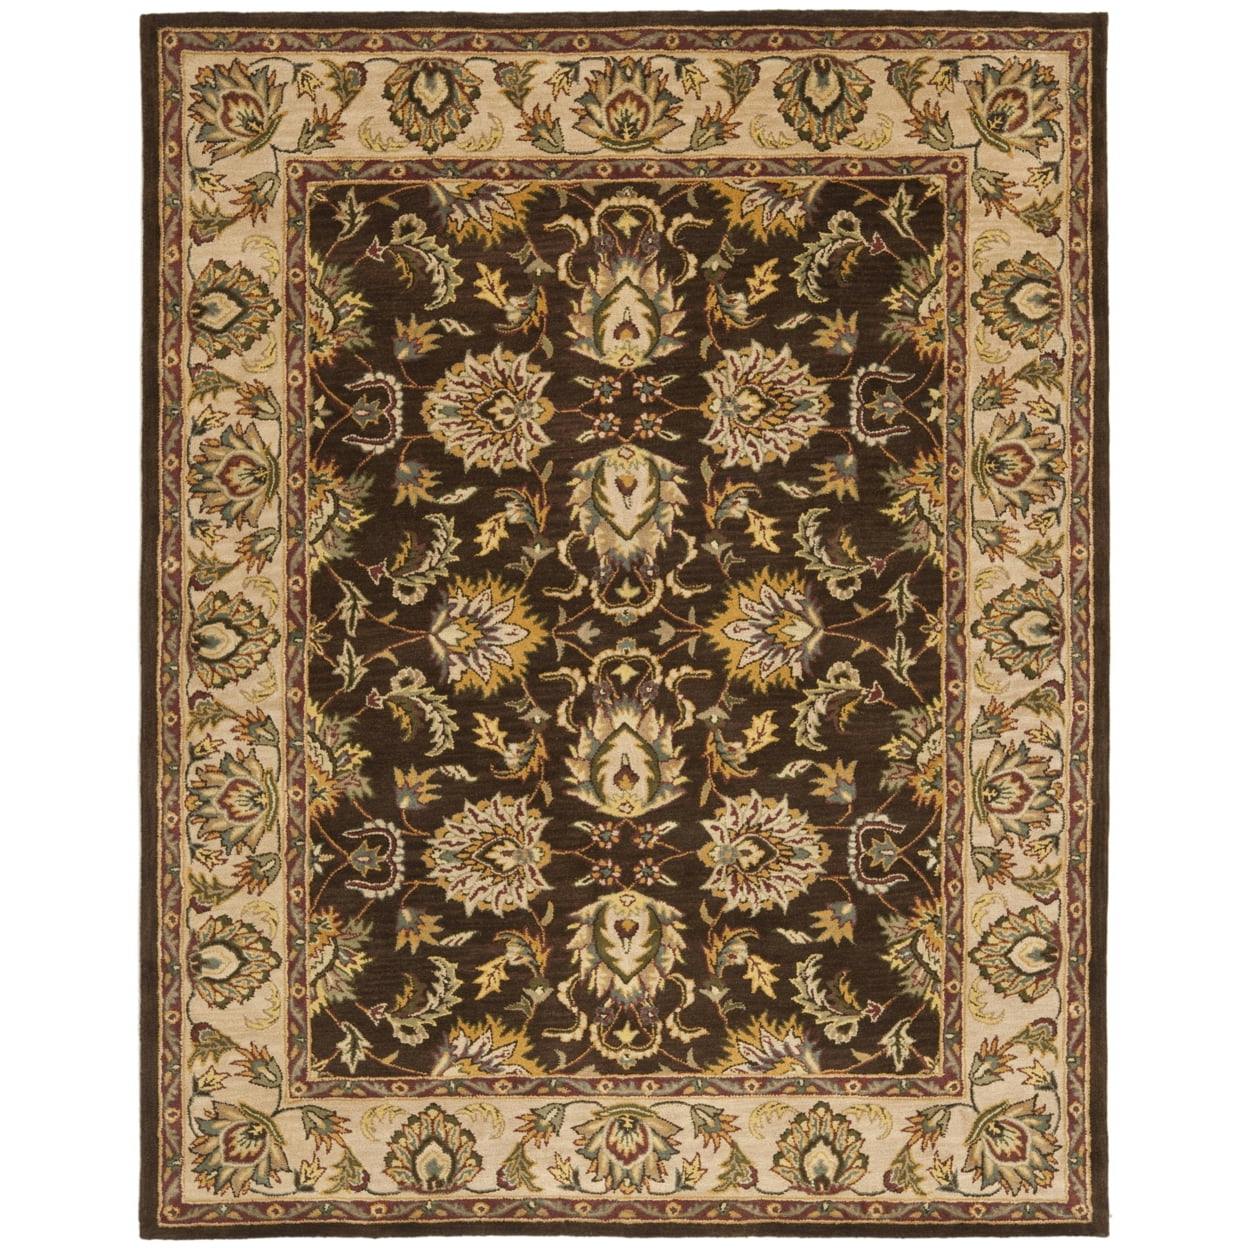 Heritage Elegance Ivory and Brown Hand-tufted Wool Area Rug, 9'6" x 13'6"